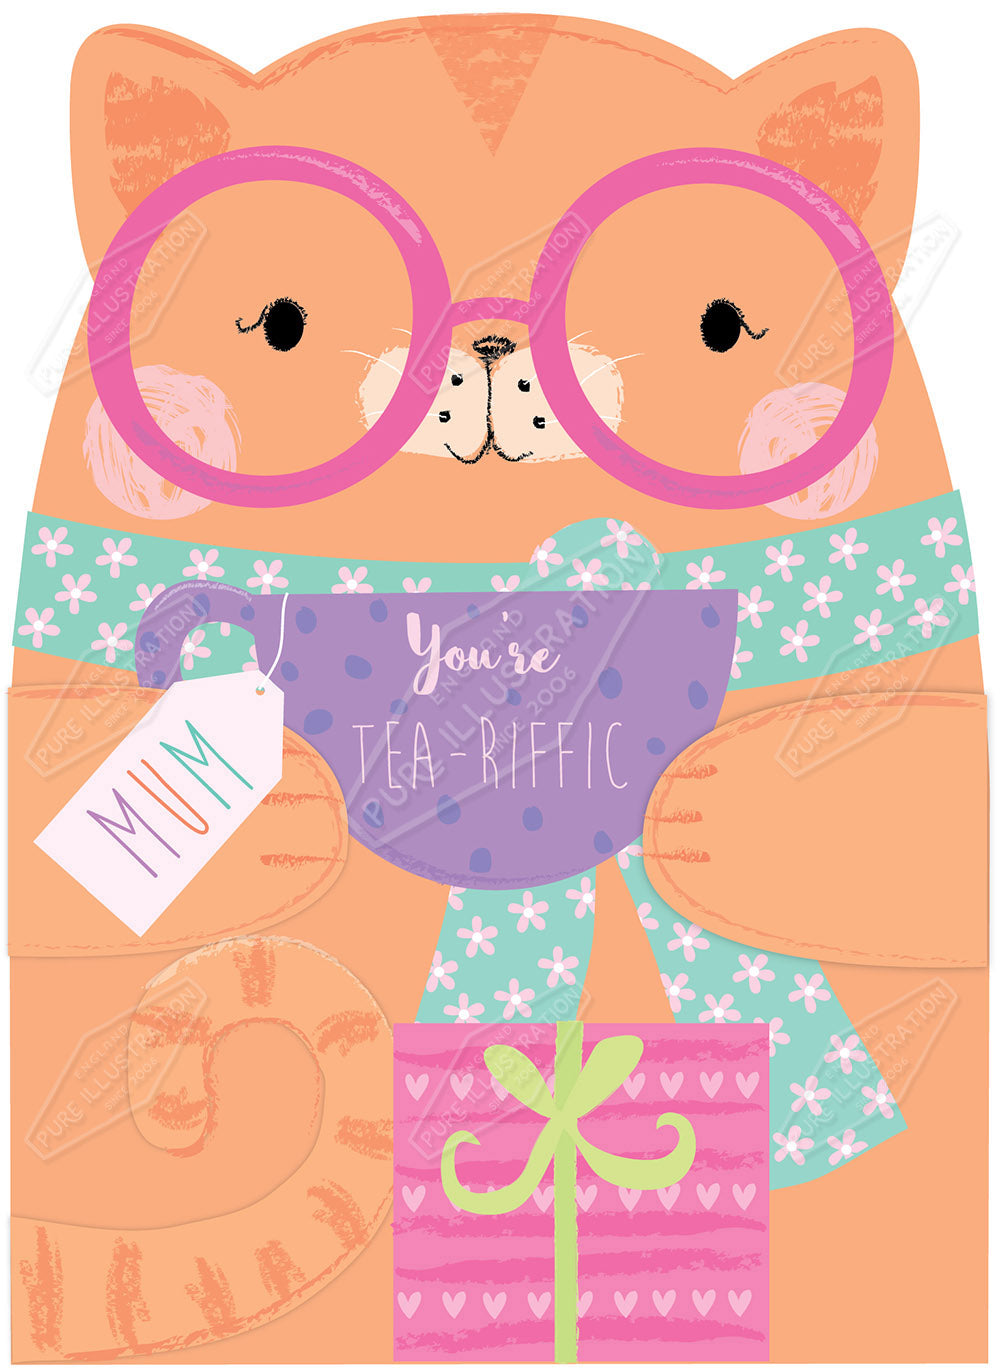 00032840AMC - Amanda McDonough is represented by Pure Art Licensing Agency - Mother's Day Greeting Card Design